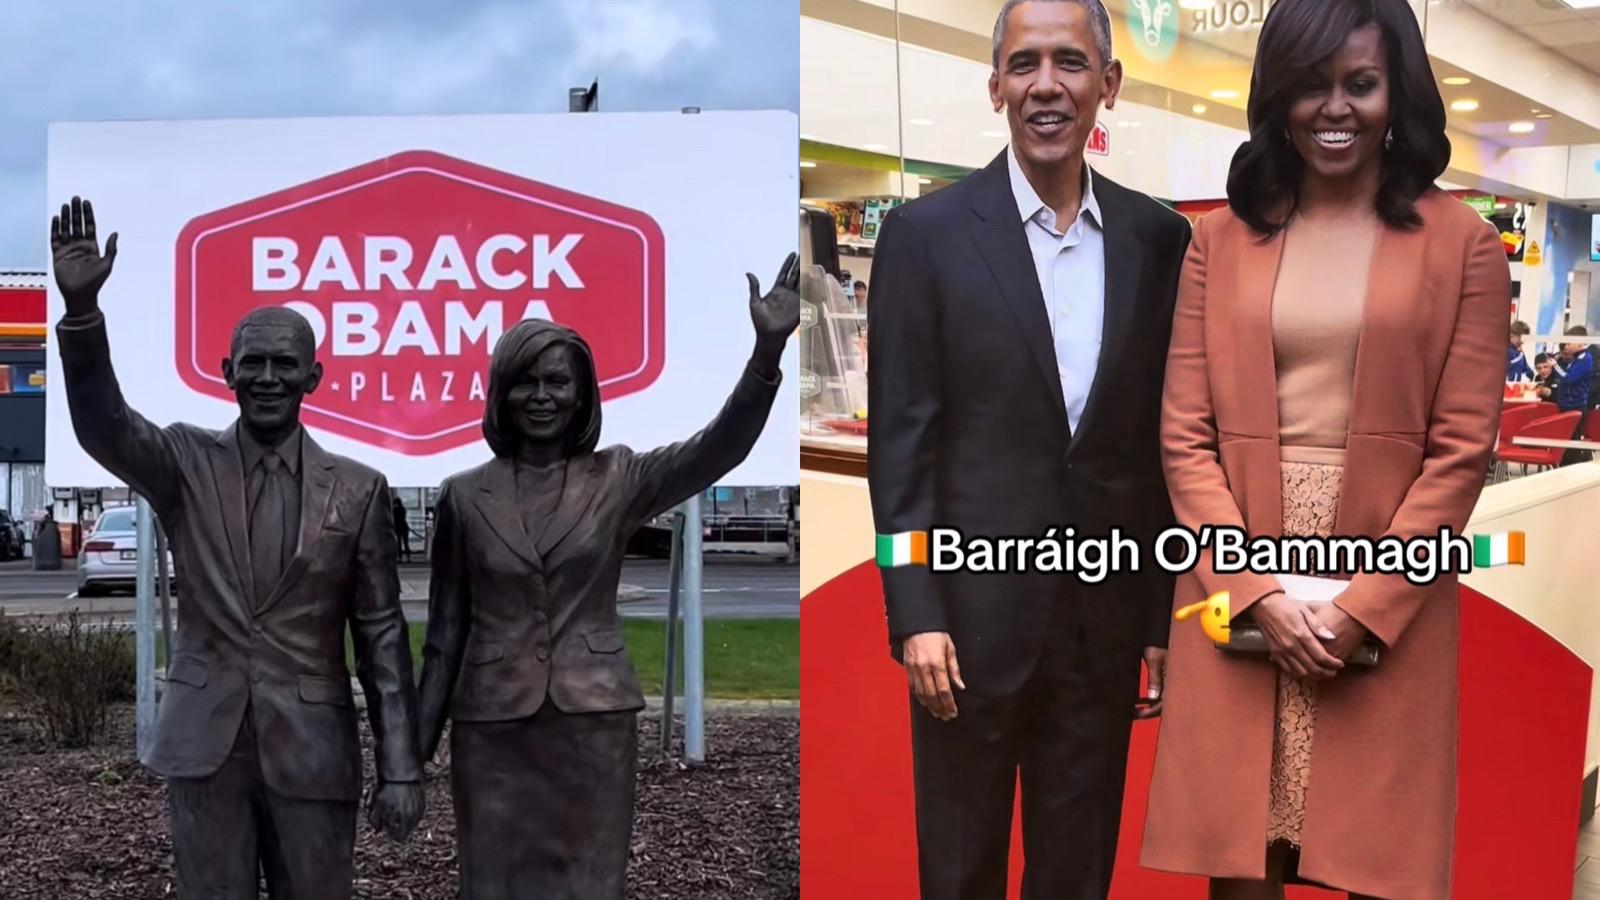 obama-themed gas station in ireland